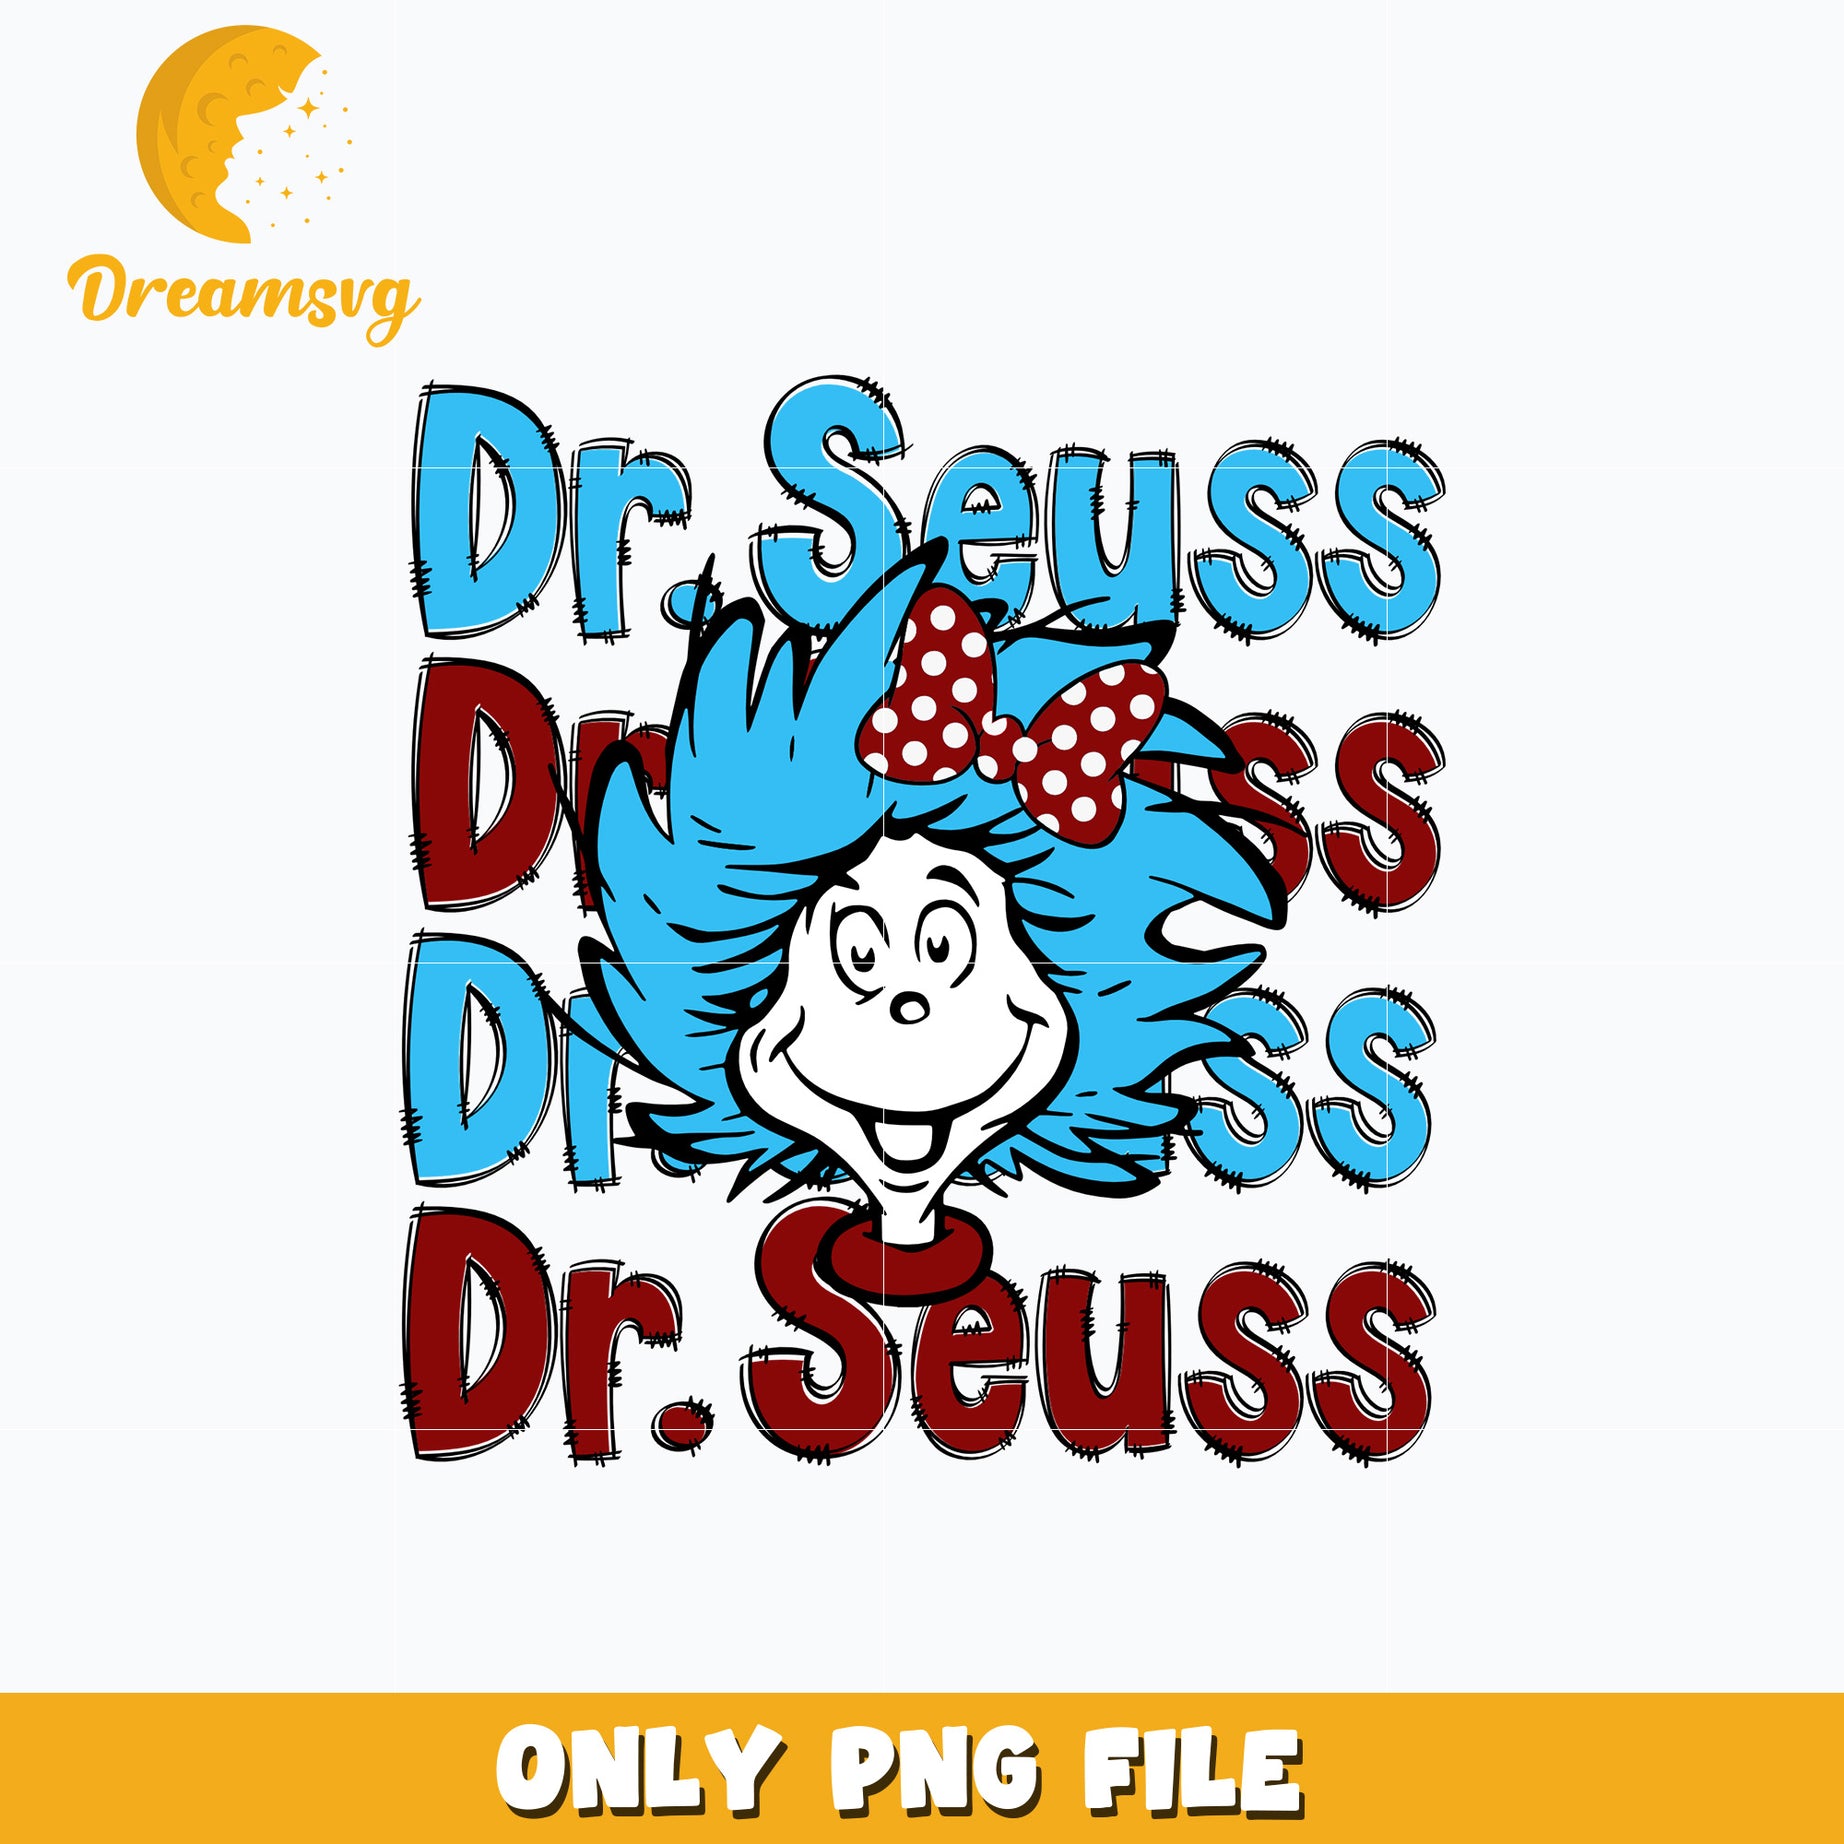 Dr seuss friends thing 1 thing 2 png